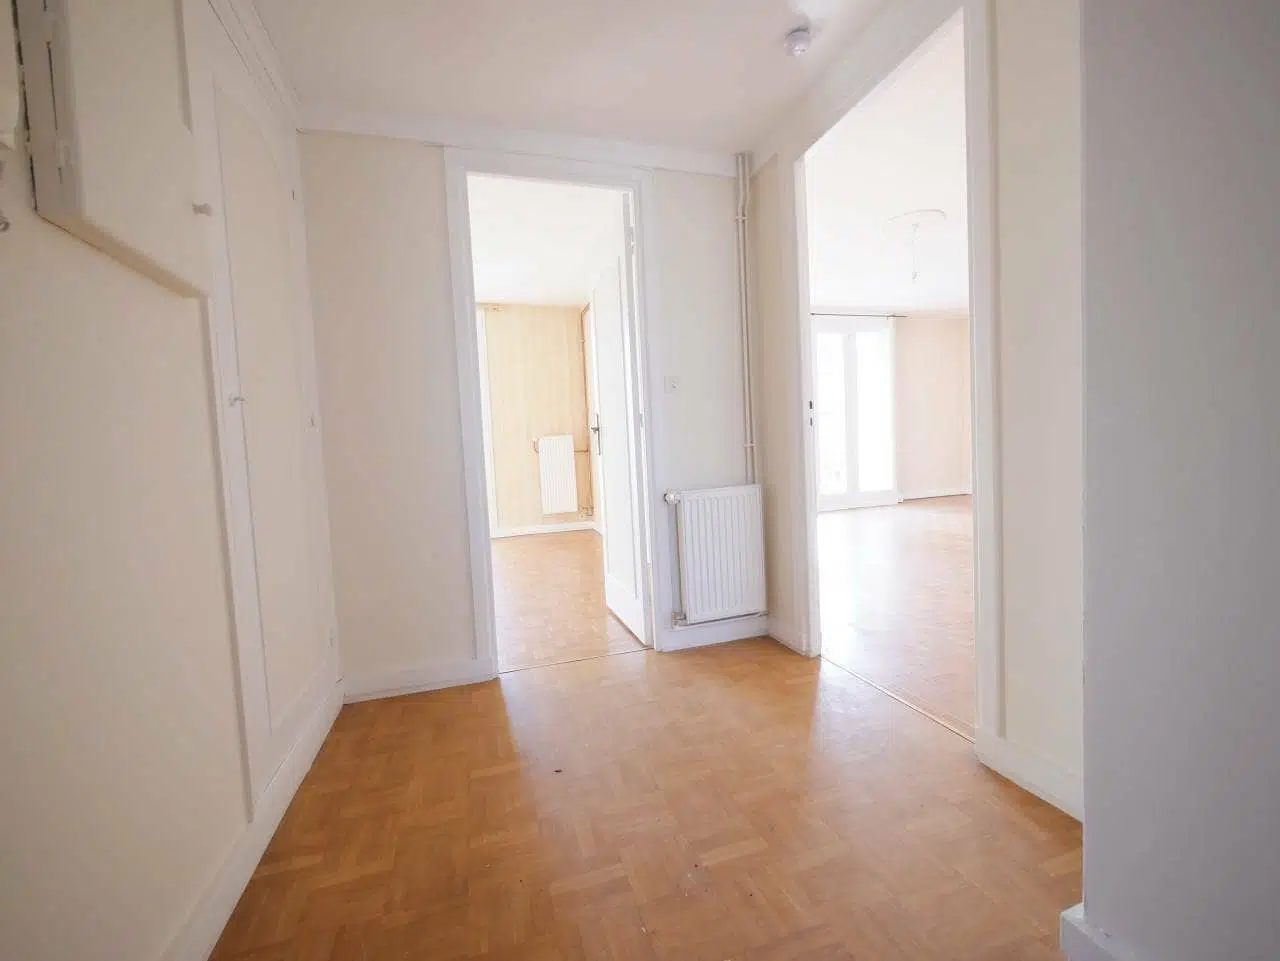 Location Appartement type F3 Le Havre 313